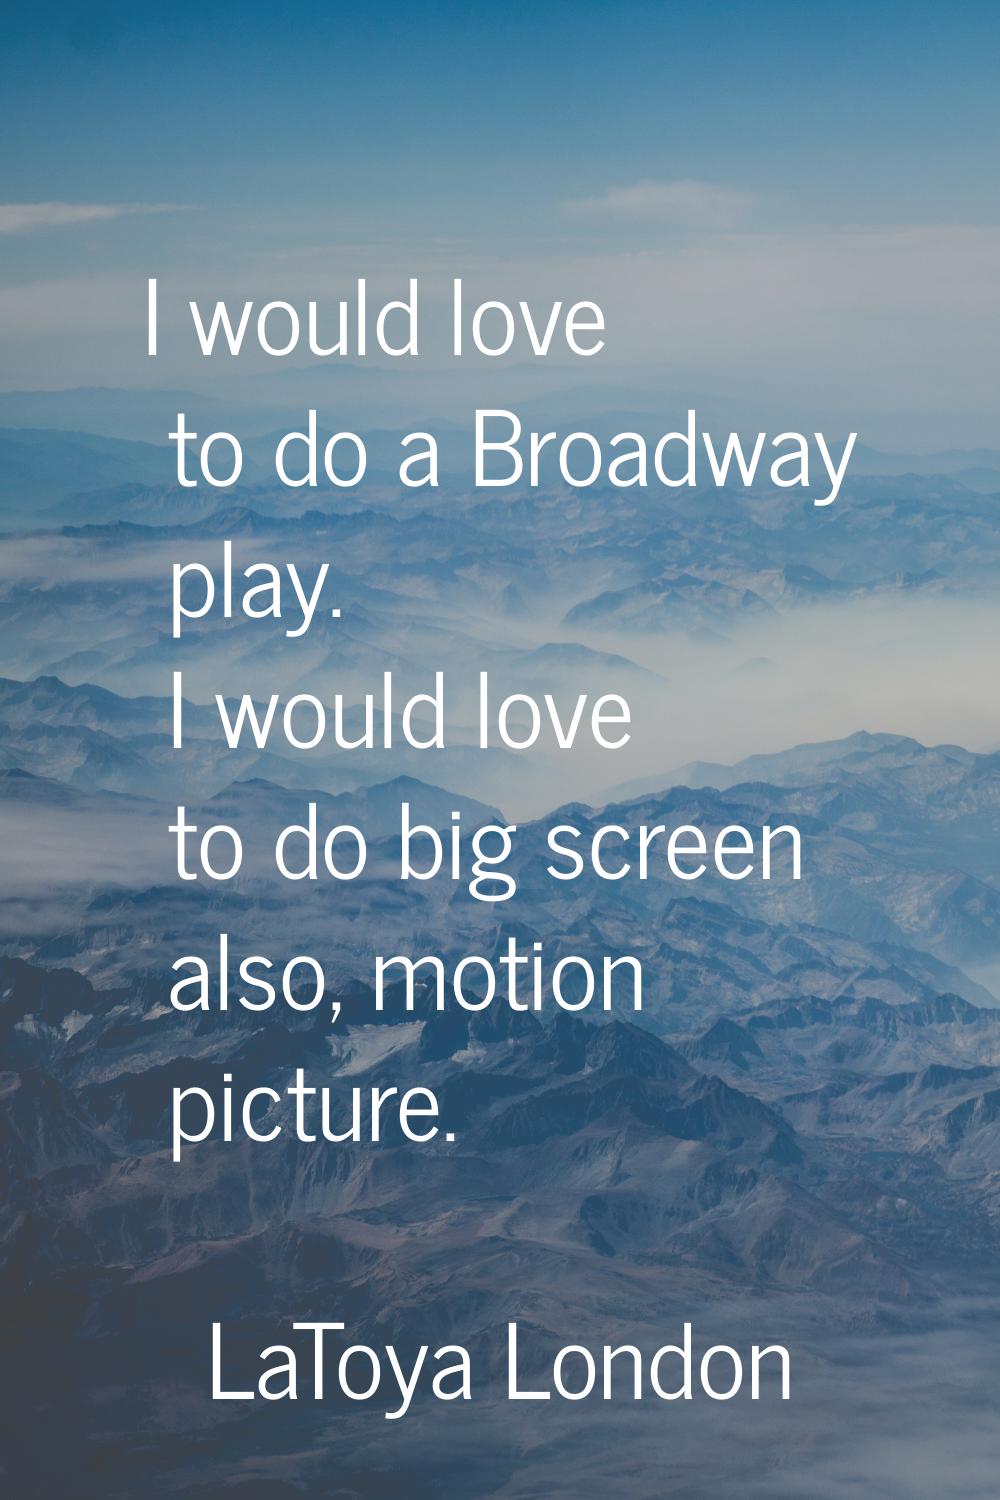 I would love to do a Broadway play. I would love to do big screen also, motion picture.